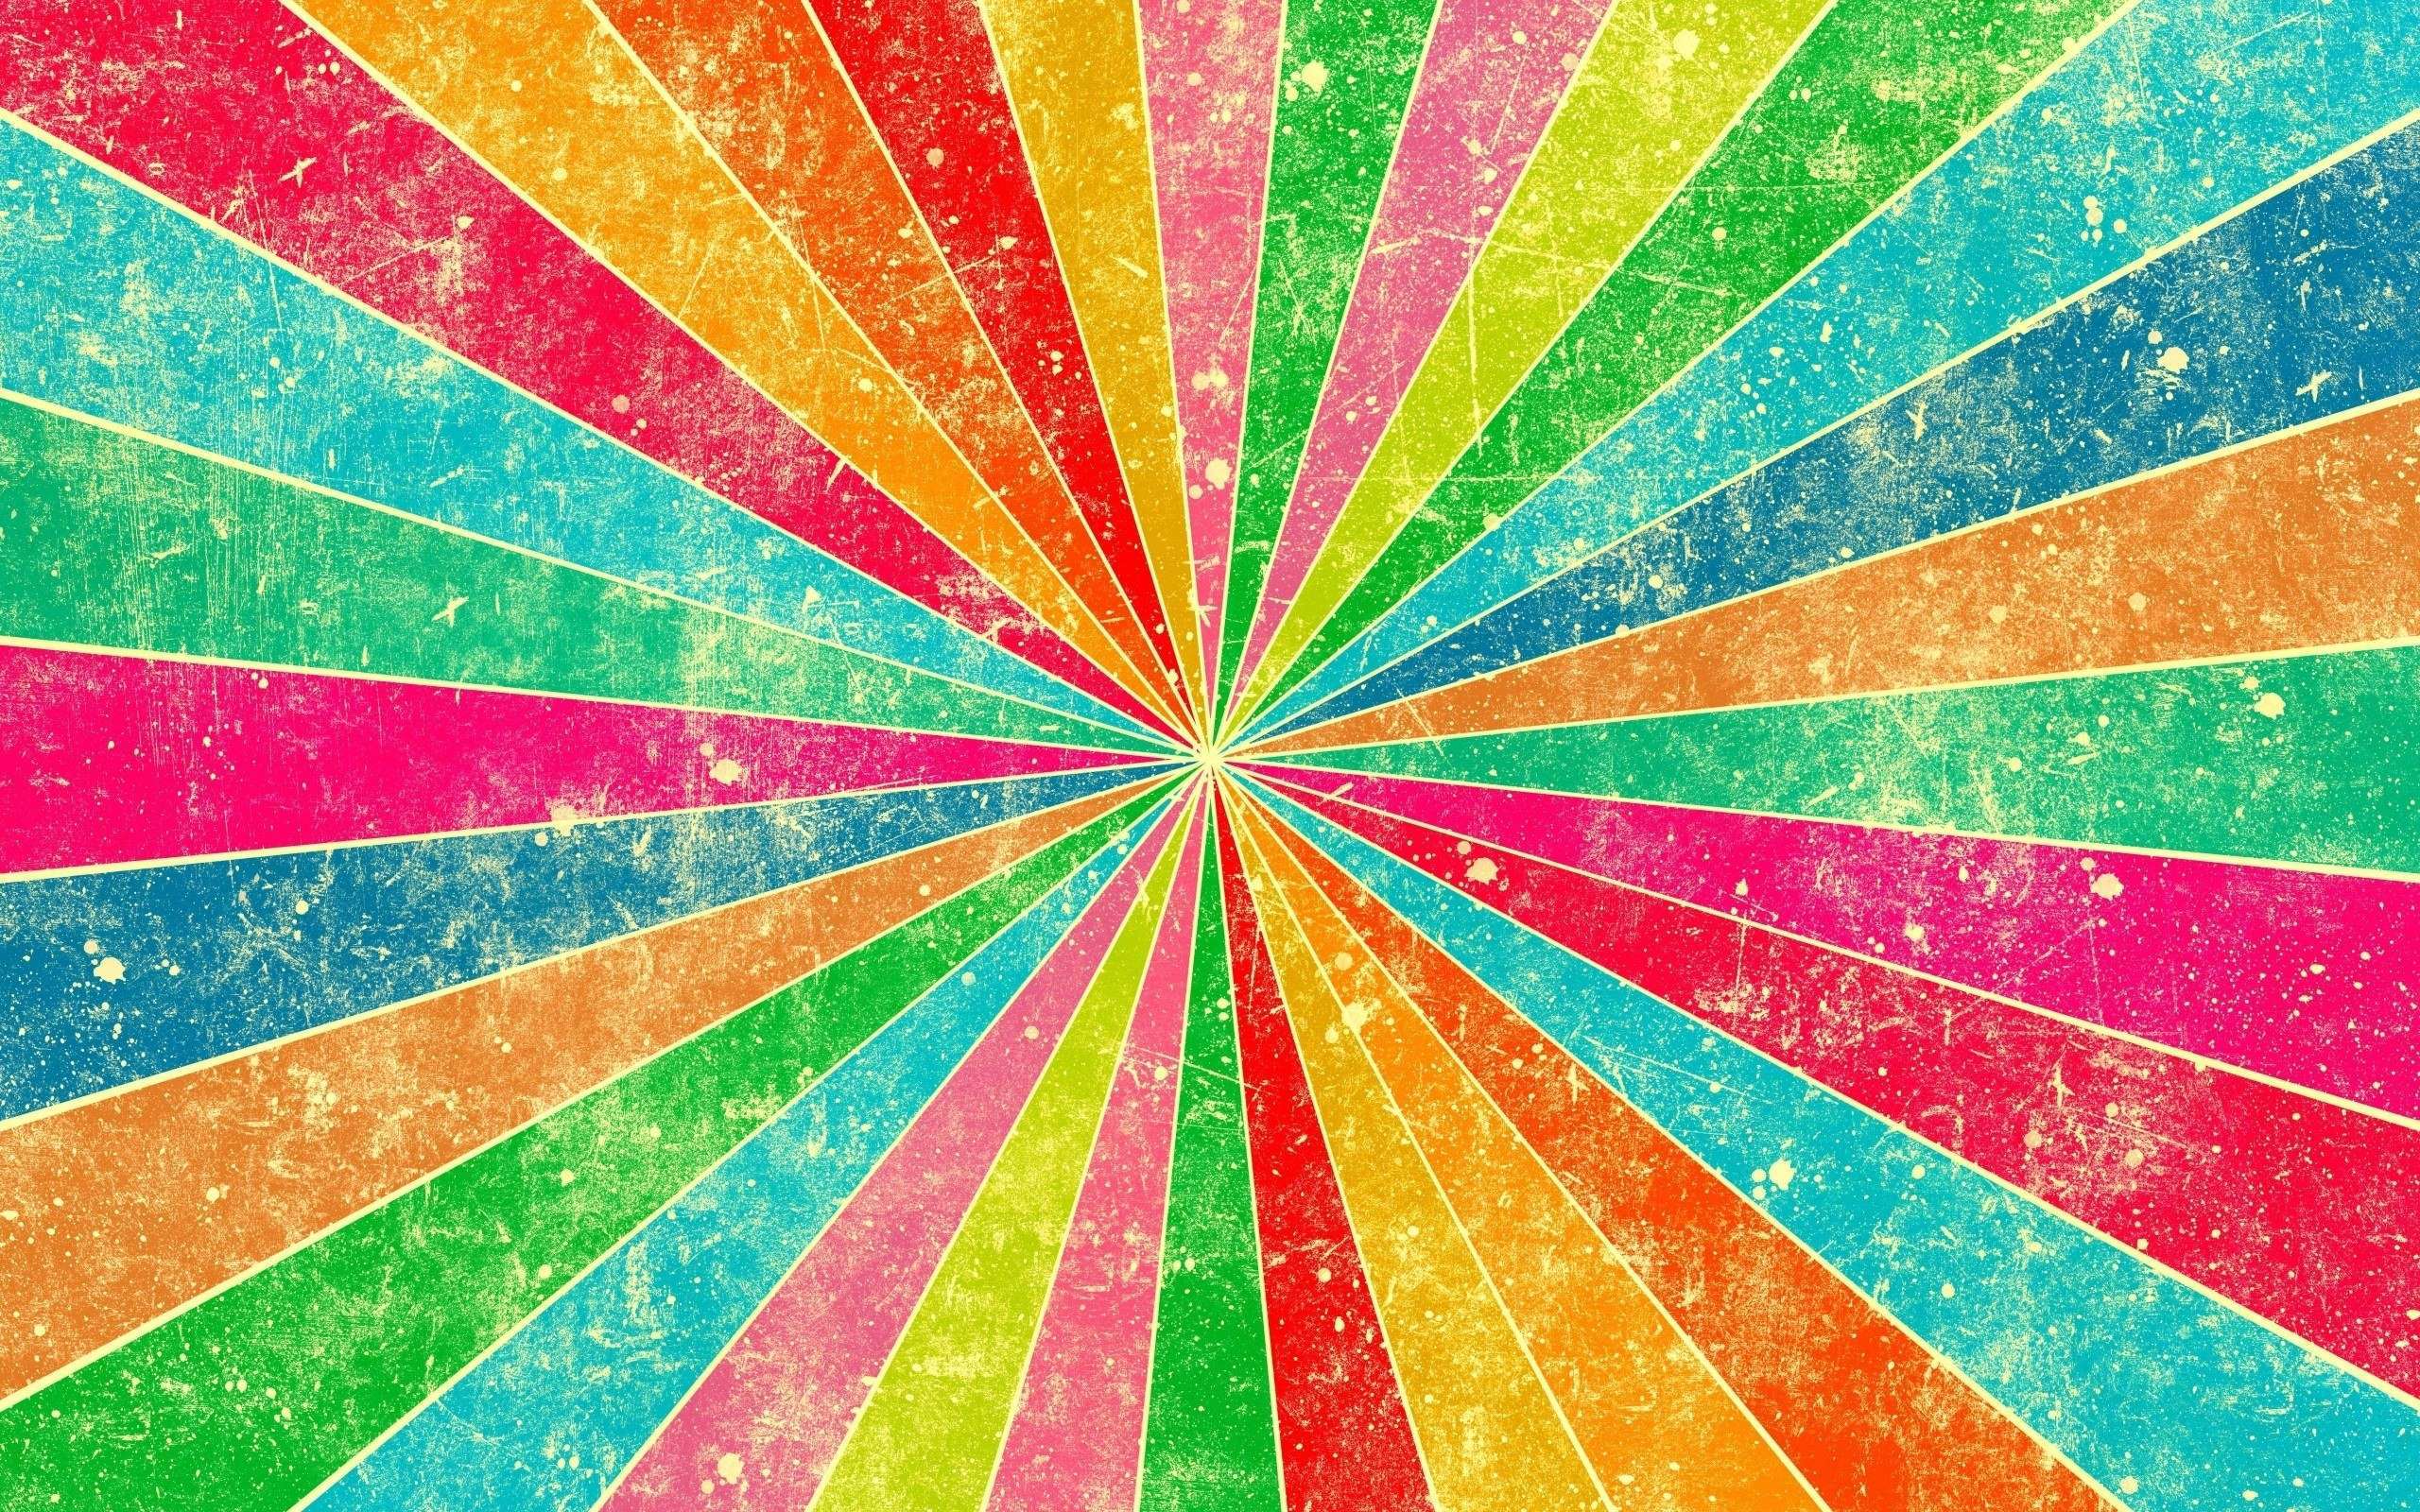 Download Awesome Rainbow Wallpaper 14526 2560x1600 px High